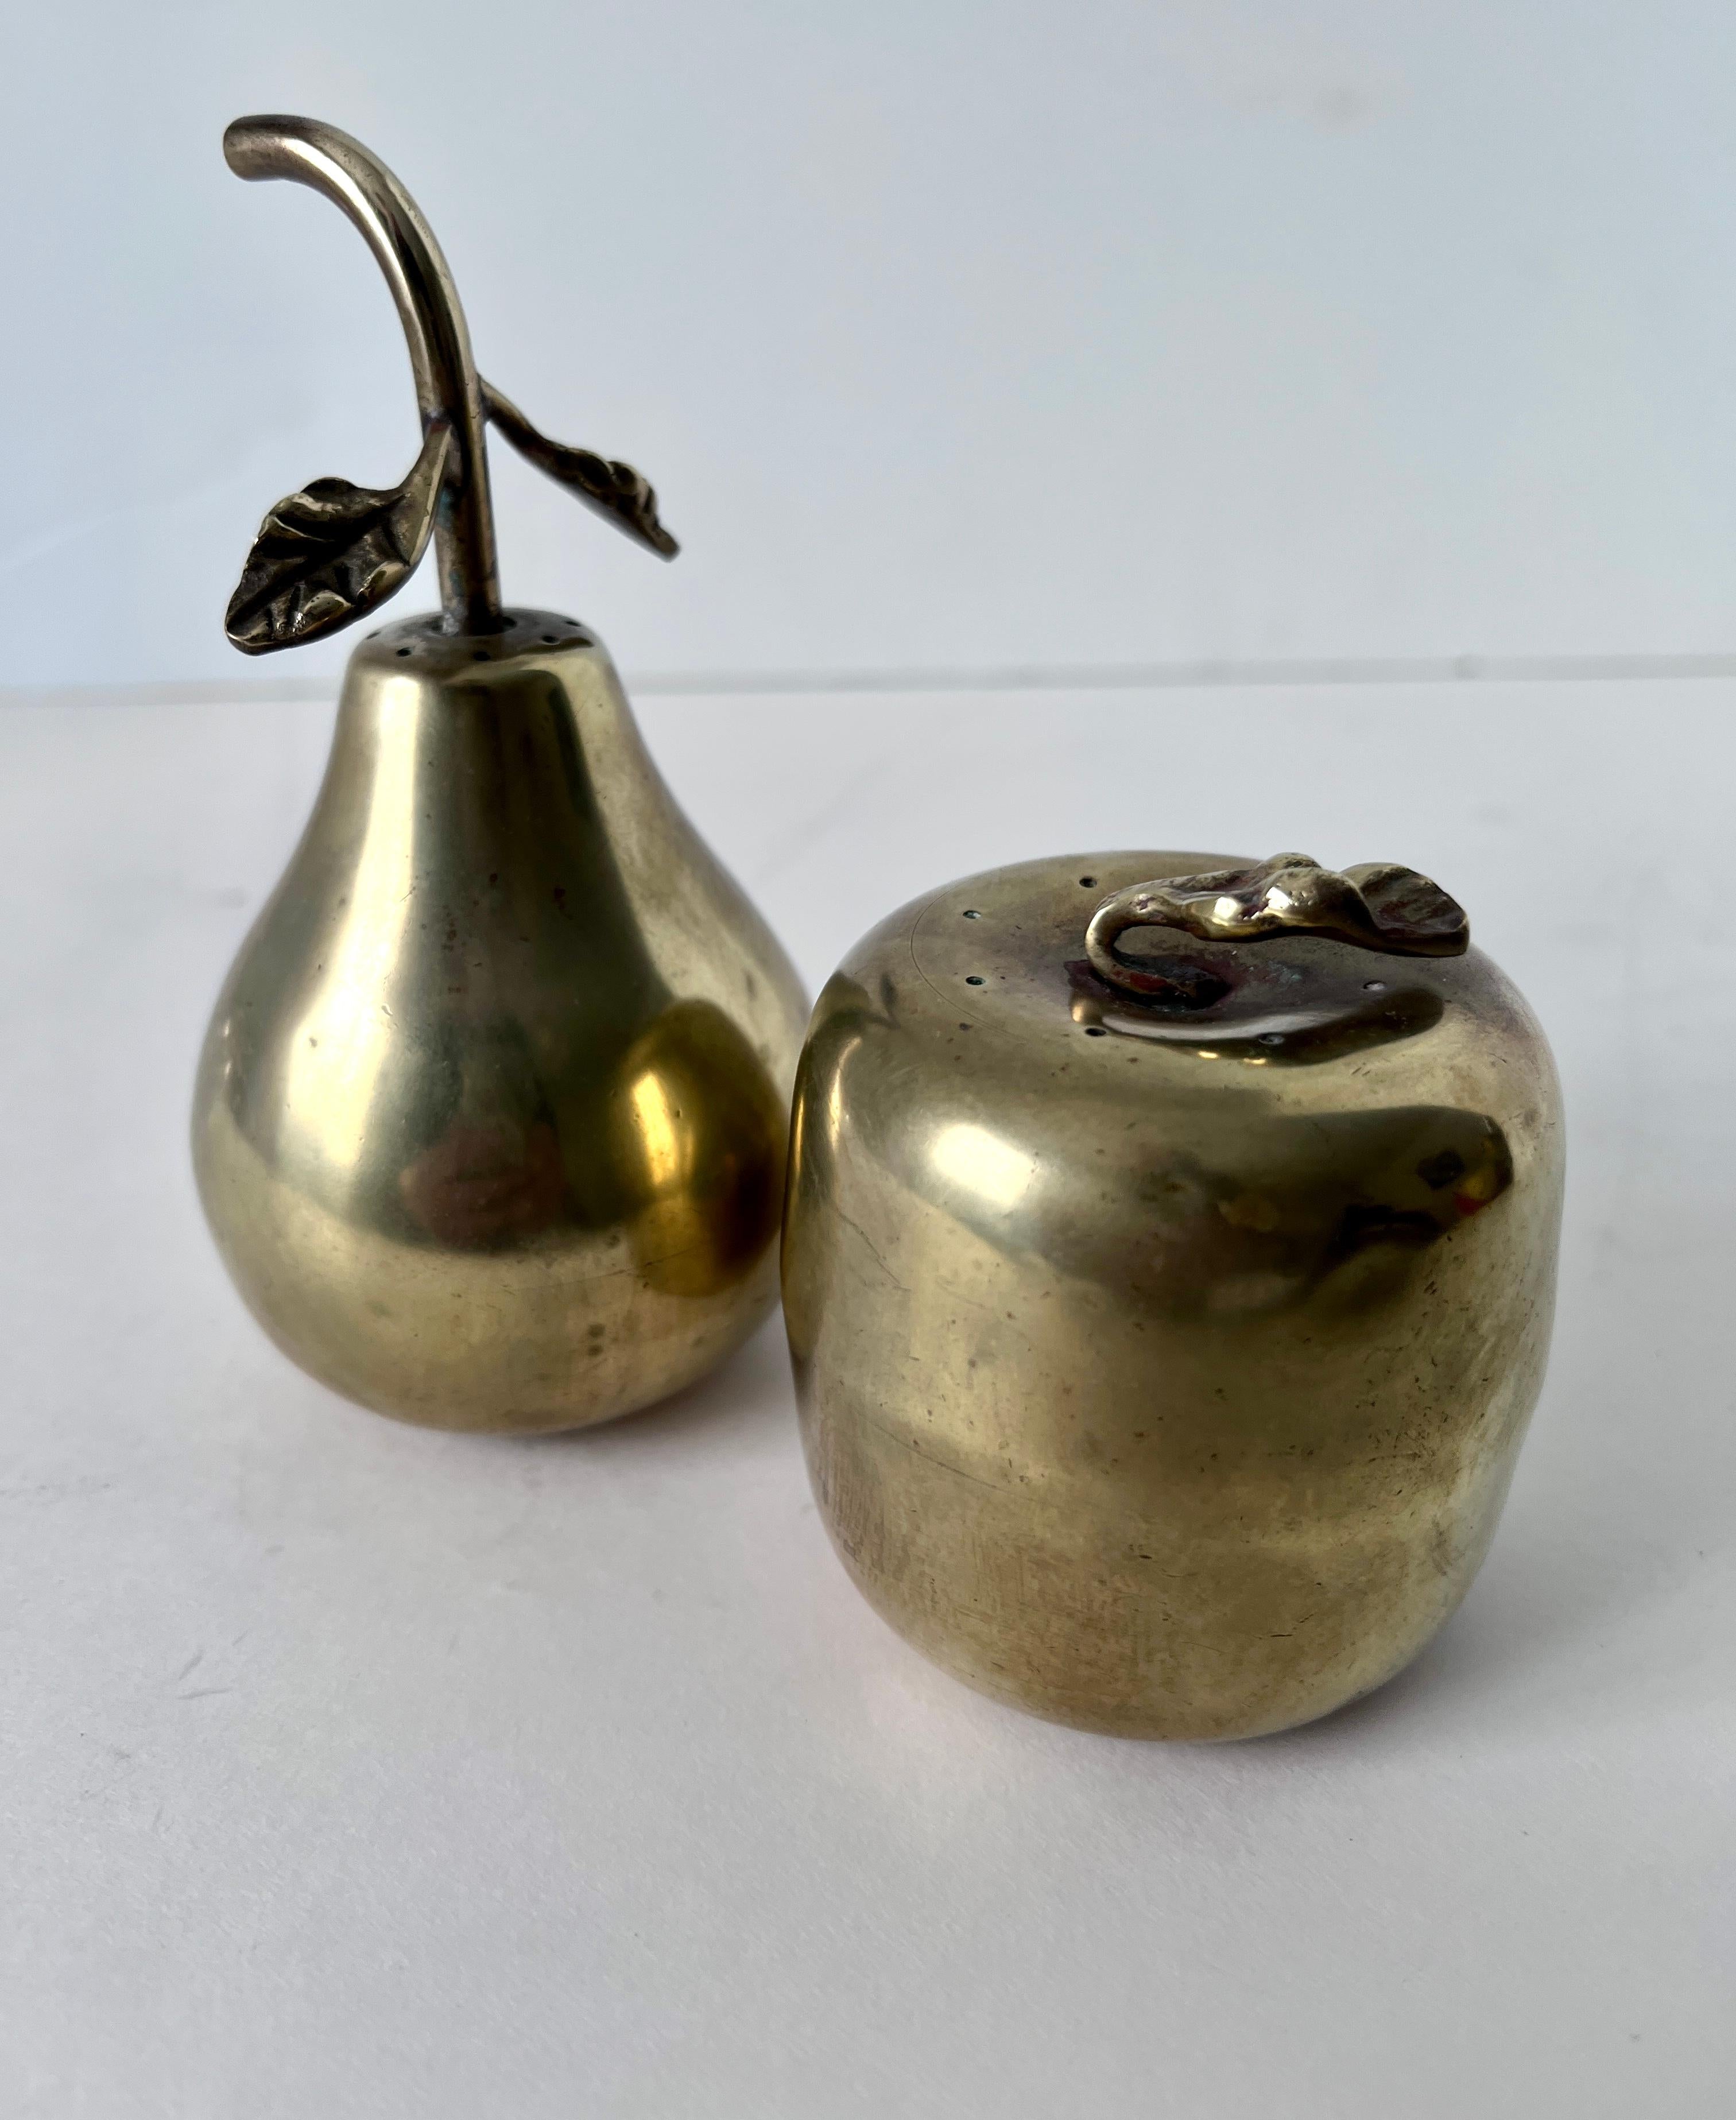 A lovely pari of salt and pepper shakers in the shape of a pear and an apple... the pair are a compliment to any table and wonderful at the holidays. 

The leaves unscrew for adding your spices.